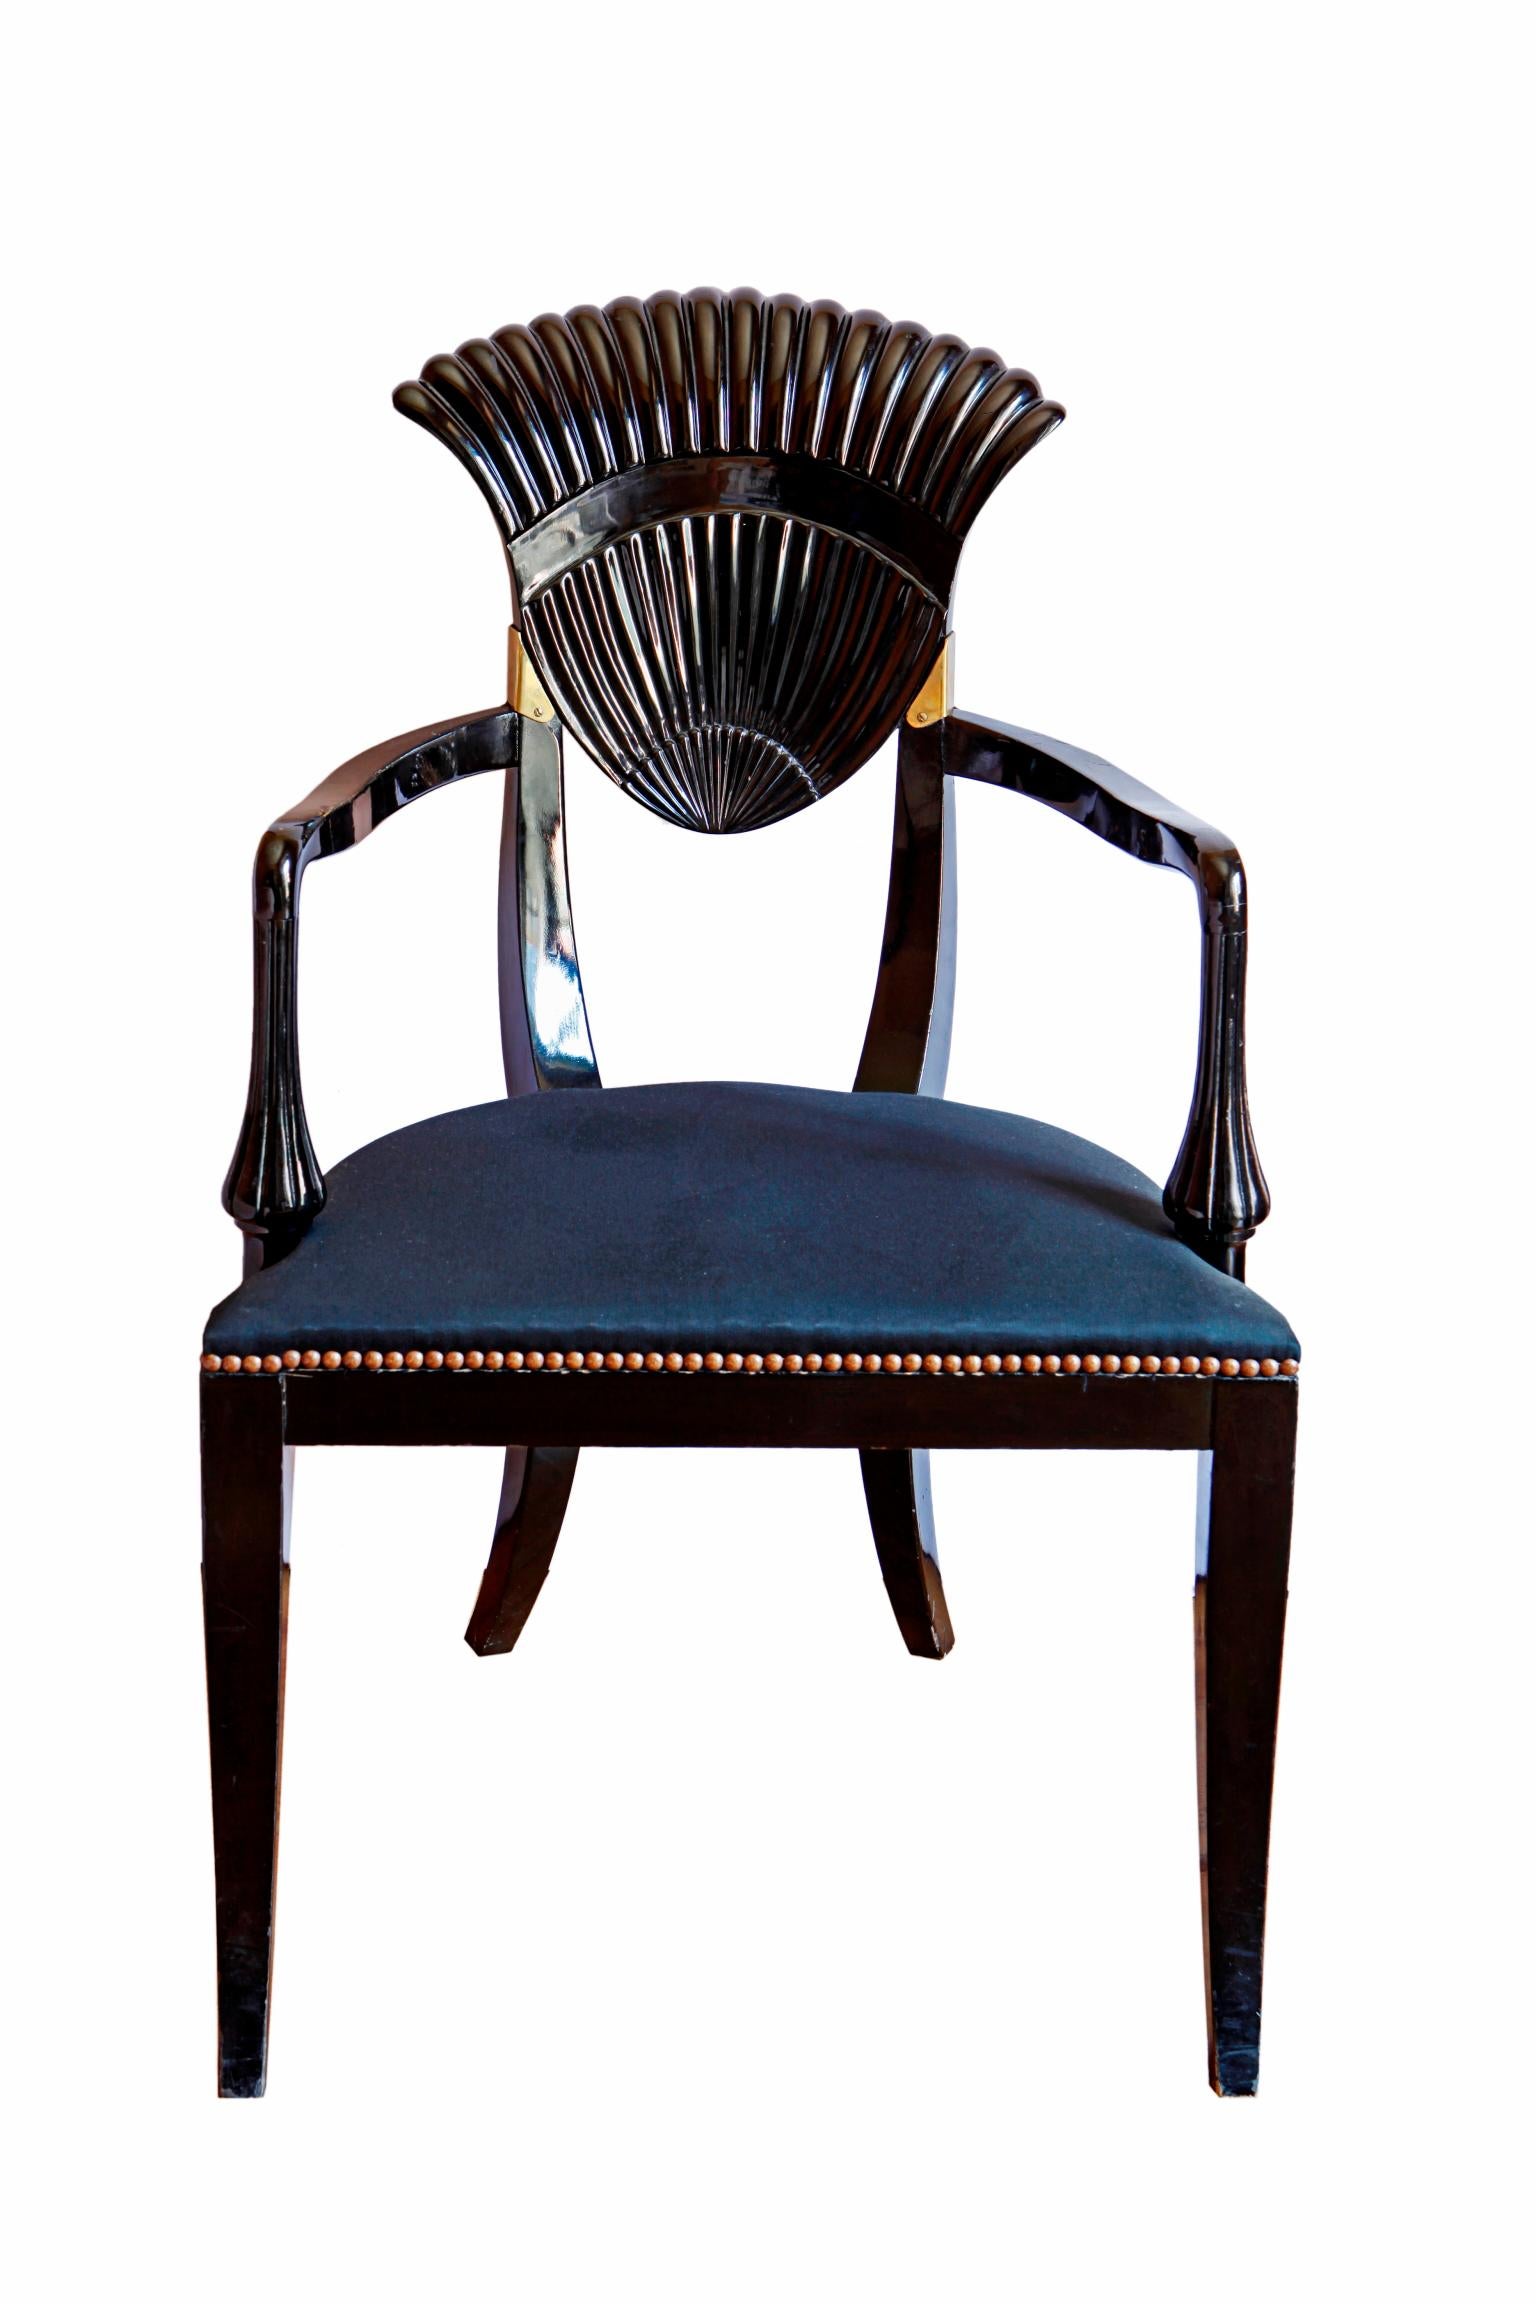 Pair of black lacquered armchairs with a brass detail in the back. Fan shaped back and serpentine shaped armrests above a black padded seat. On sabre legs.